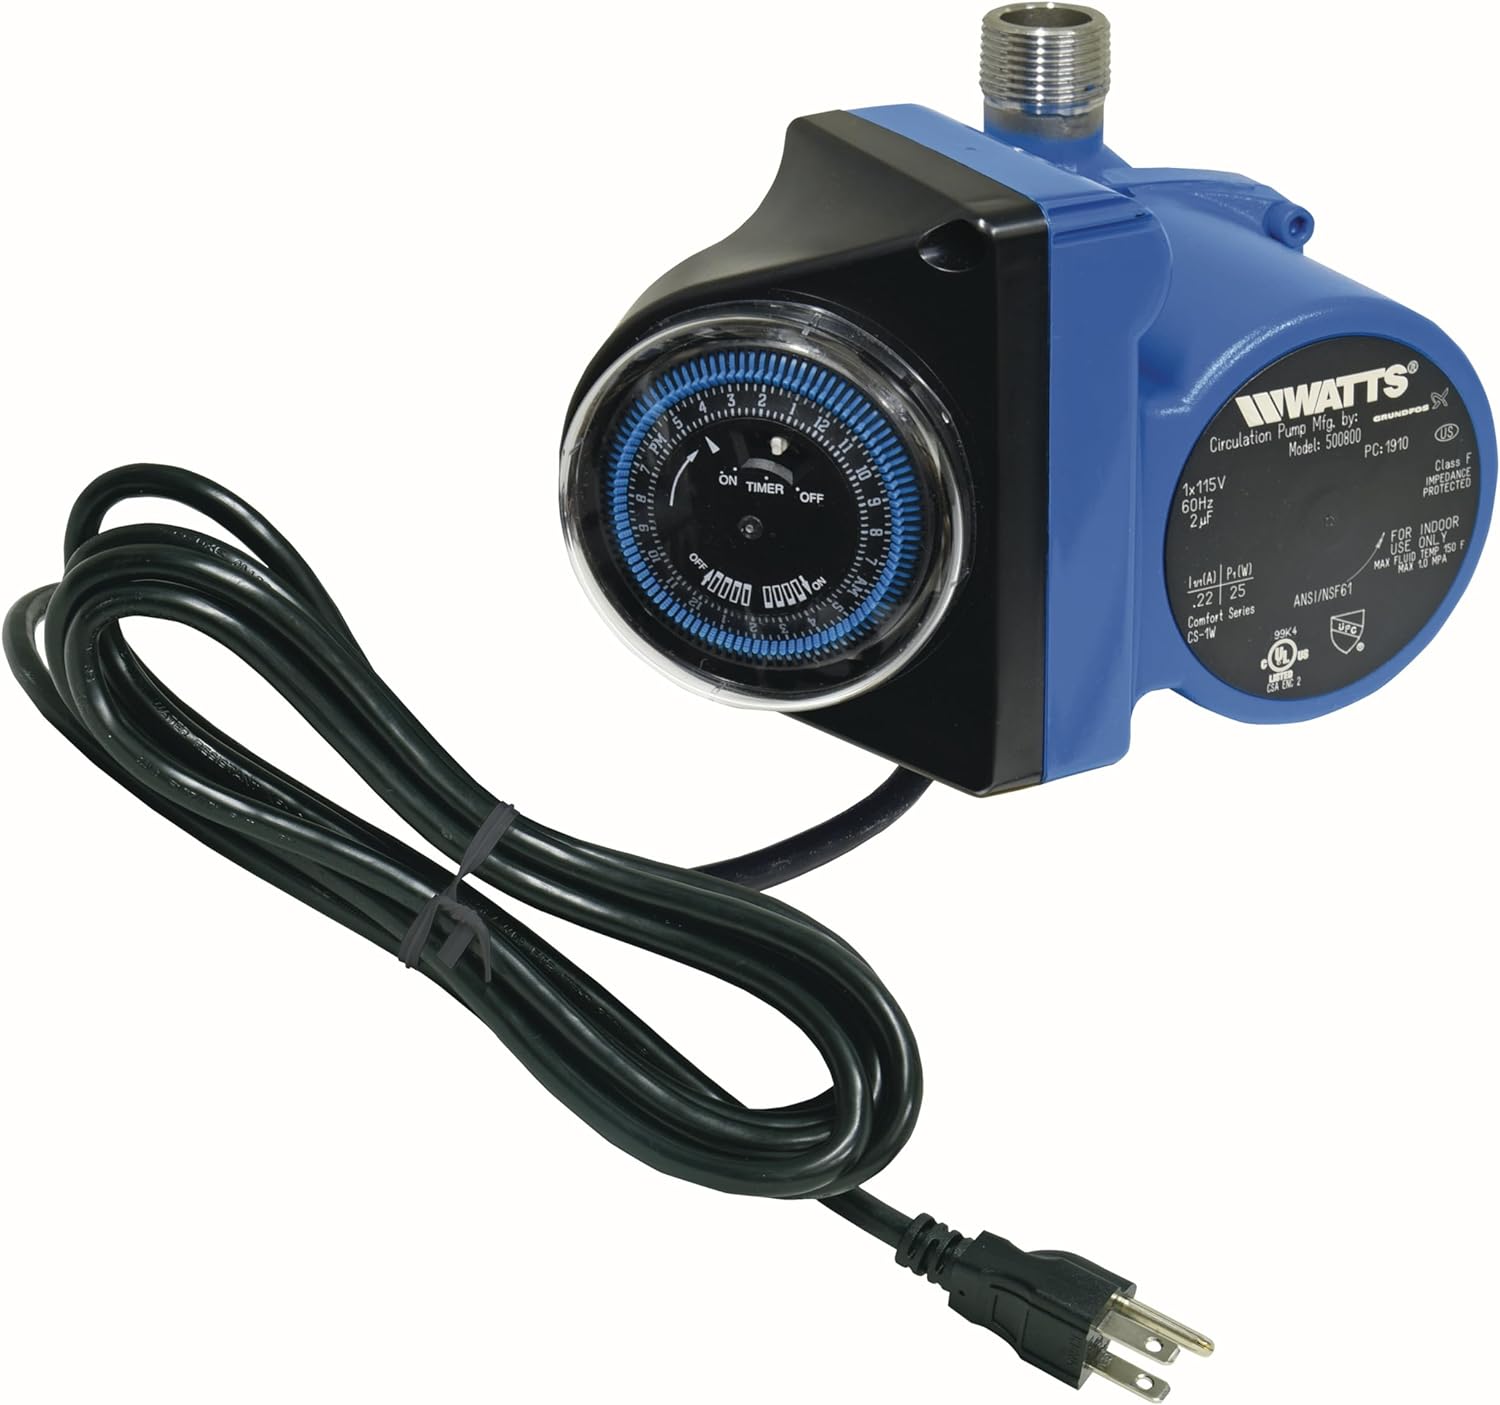 Watts 500800 Instant Hot Water Recirculating Pump System with Built-In Timer